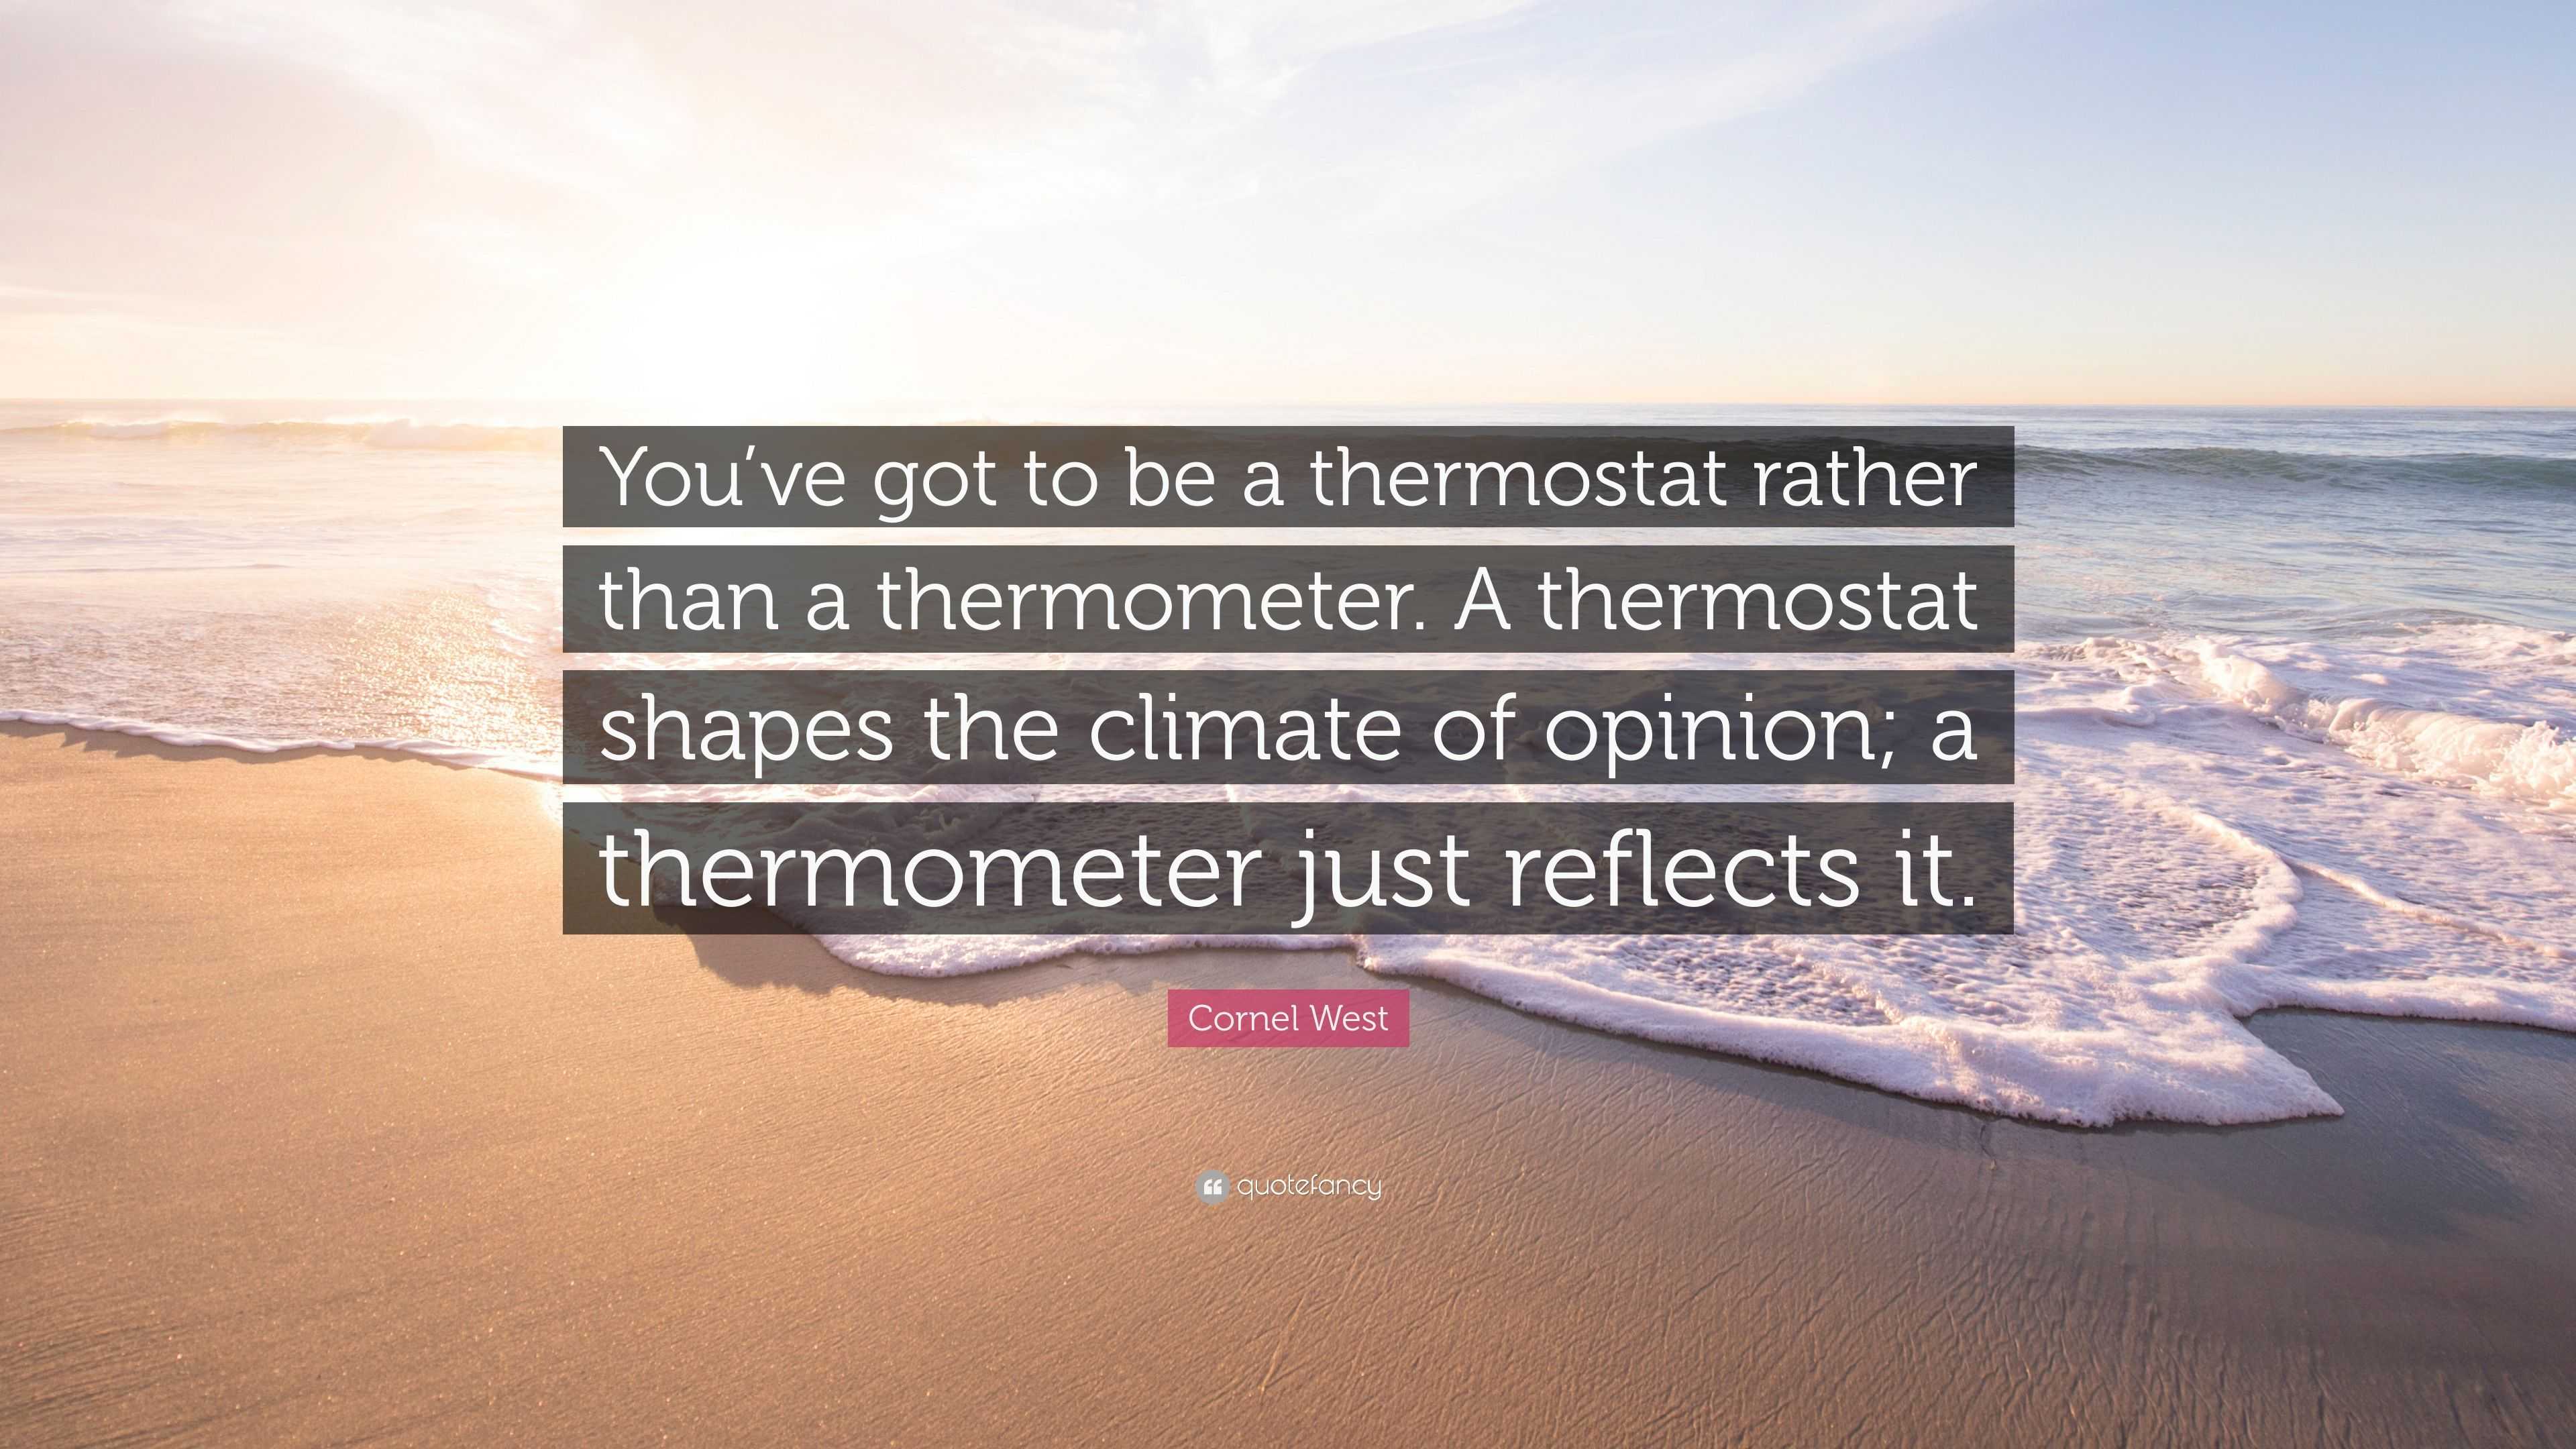 Are You a Thermometer or Thermostat in Your Relationships?